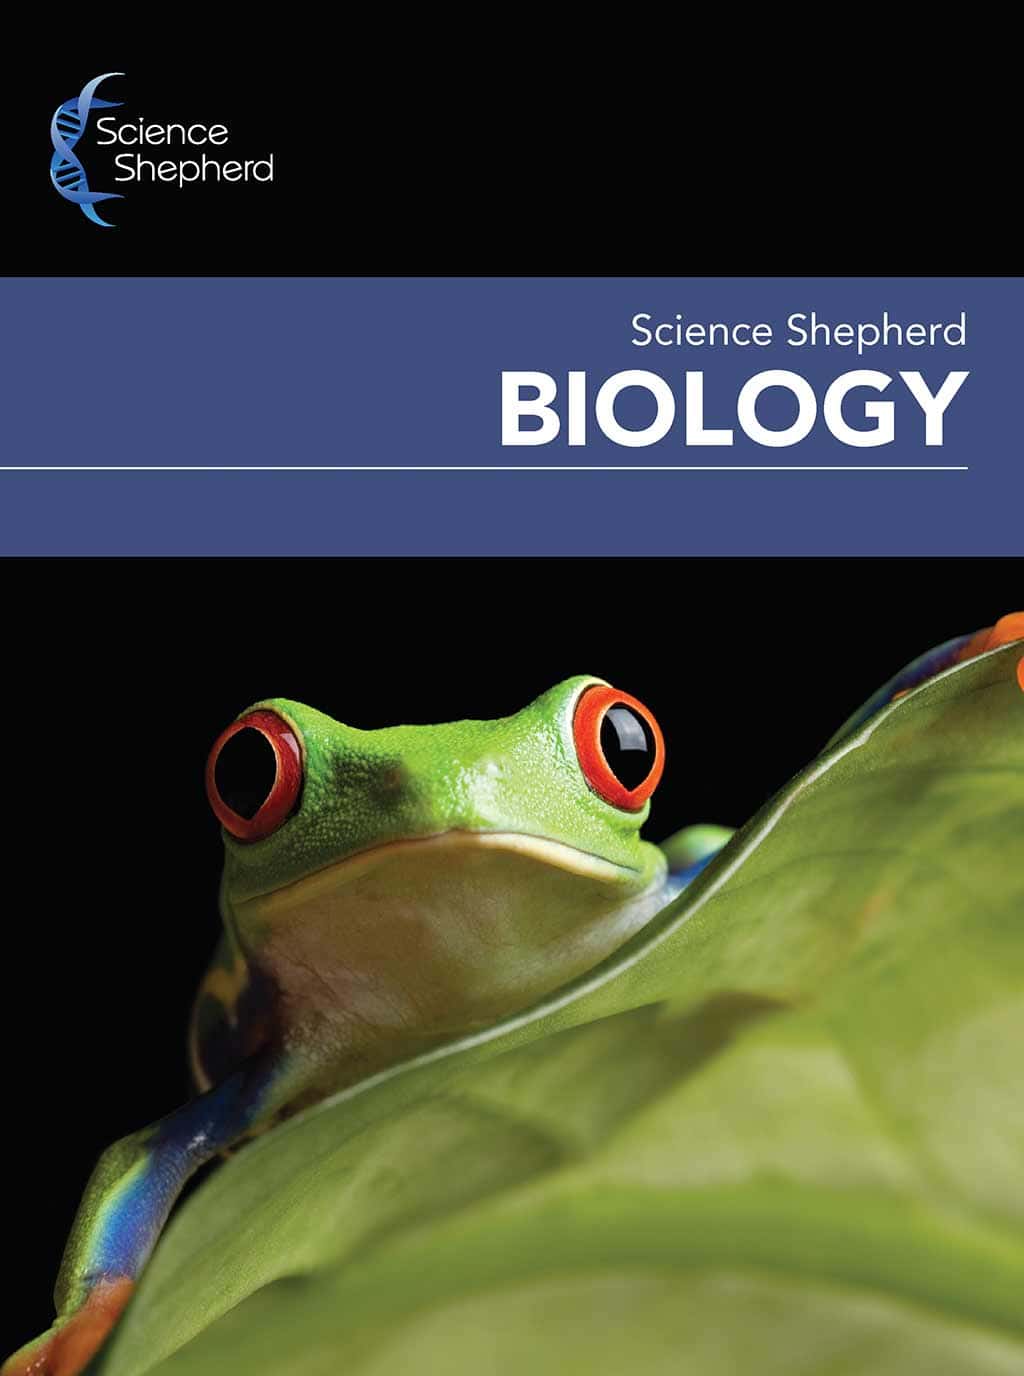 Science Shepherd Biology Homeschool Textbook cover of a green frog on a leaf